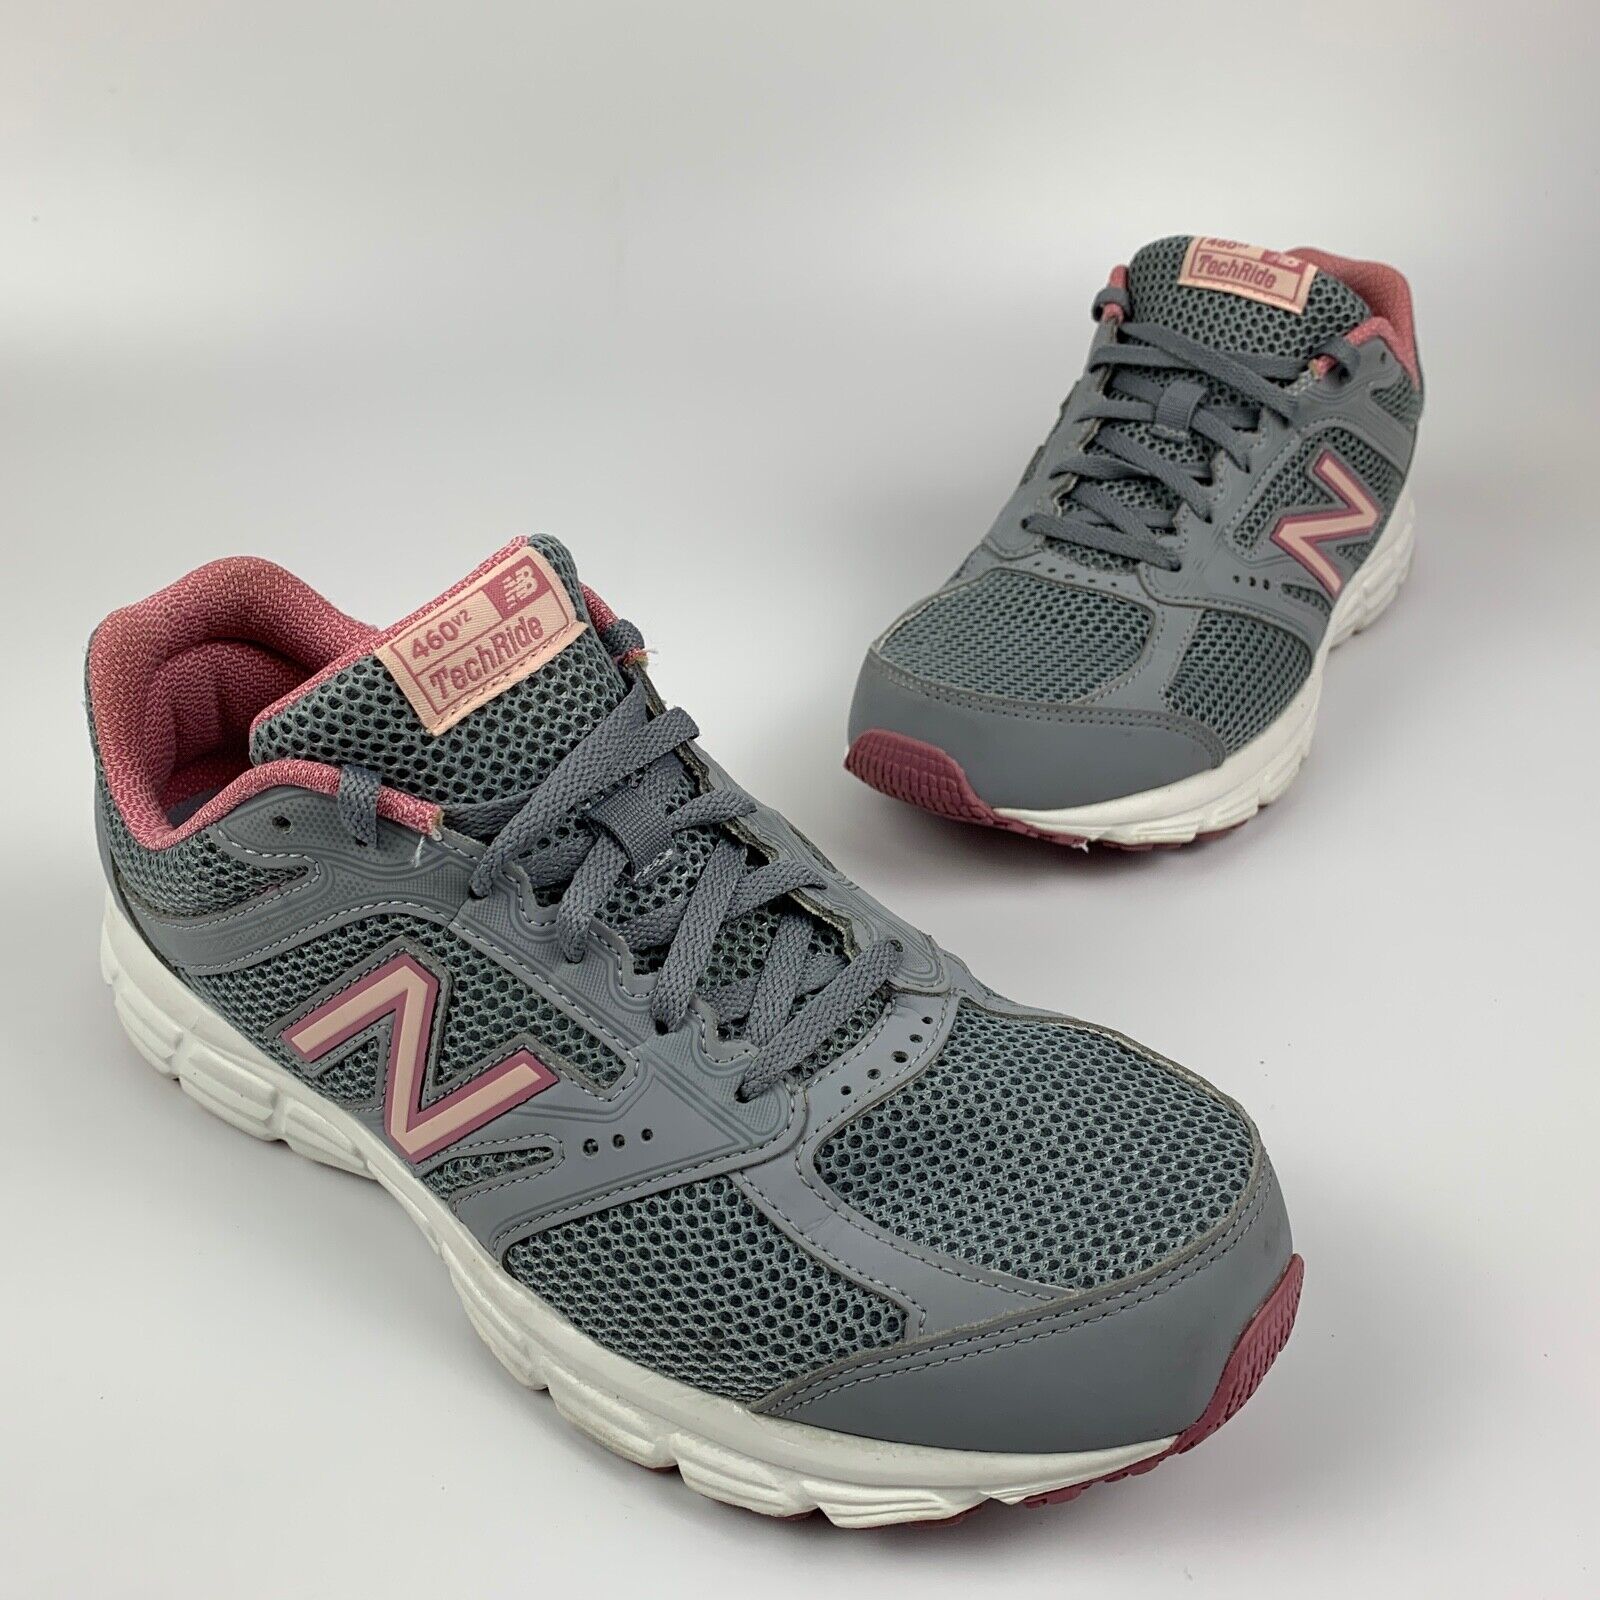 New Balance National uniform free shipping Women#039;s Sz Animer and price revision 10 Techride V2 460 W46 Running Shoes